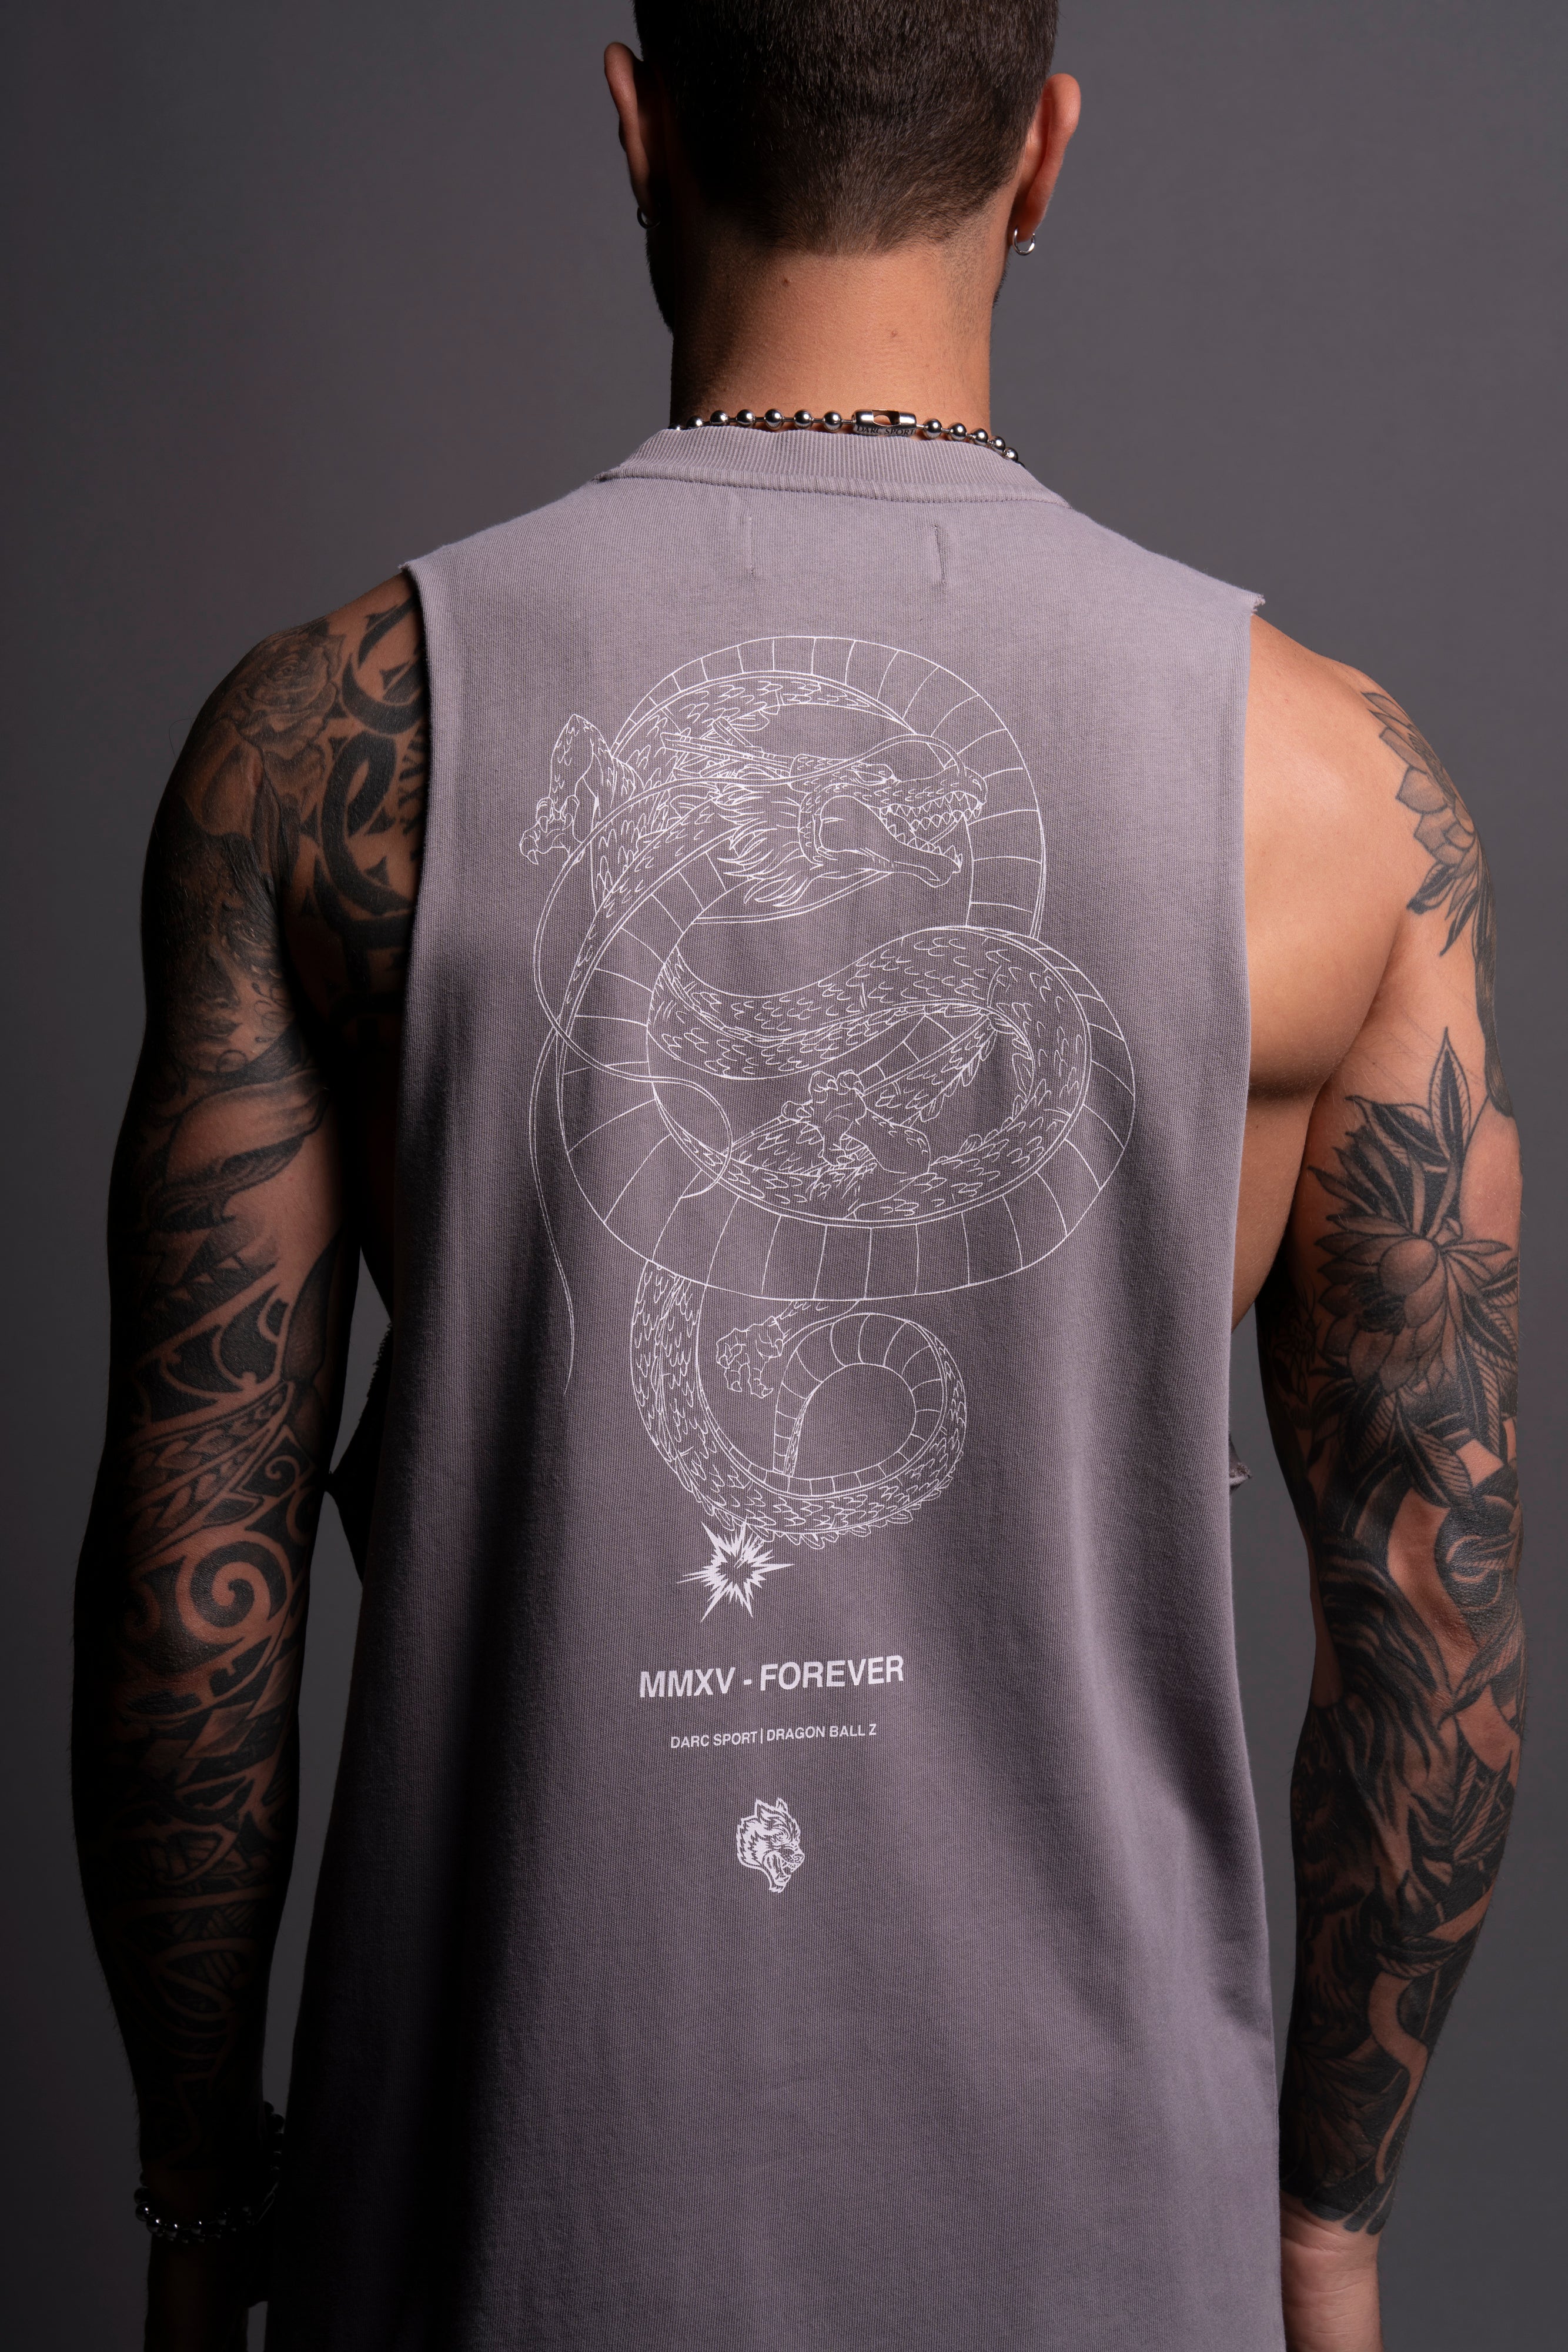 Shenron "Tommy" Muscle Tee in Pale Gray